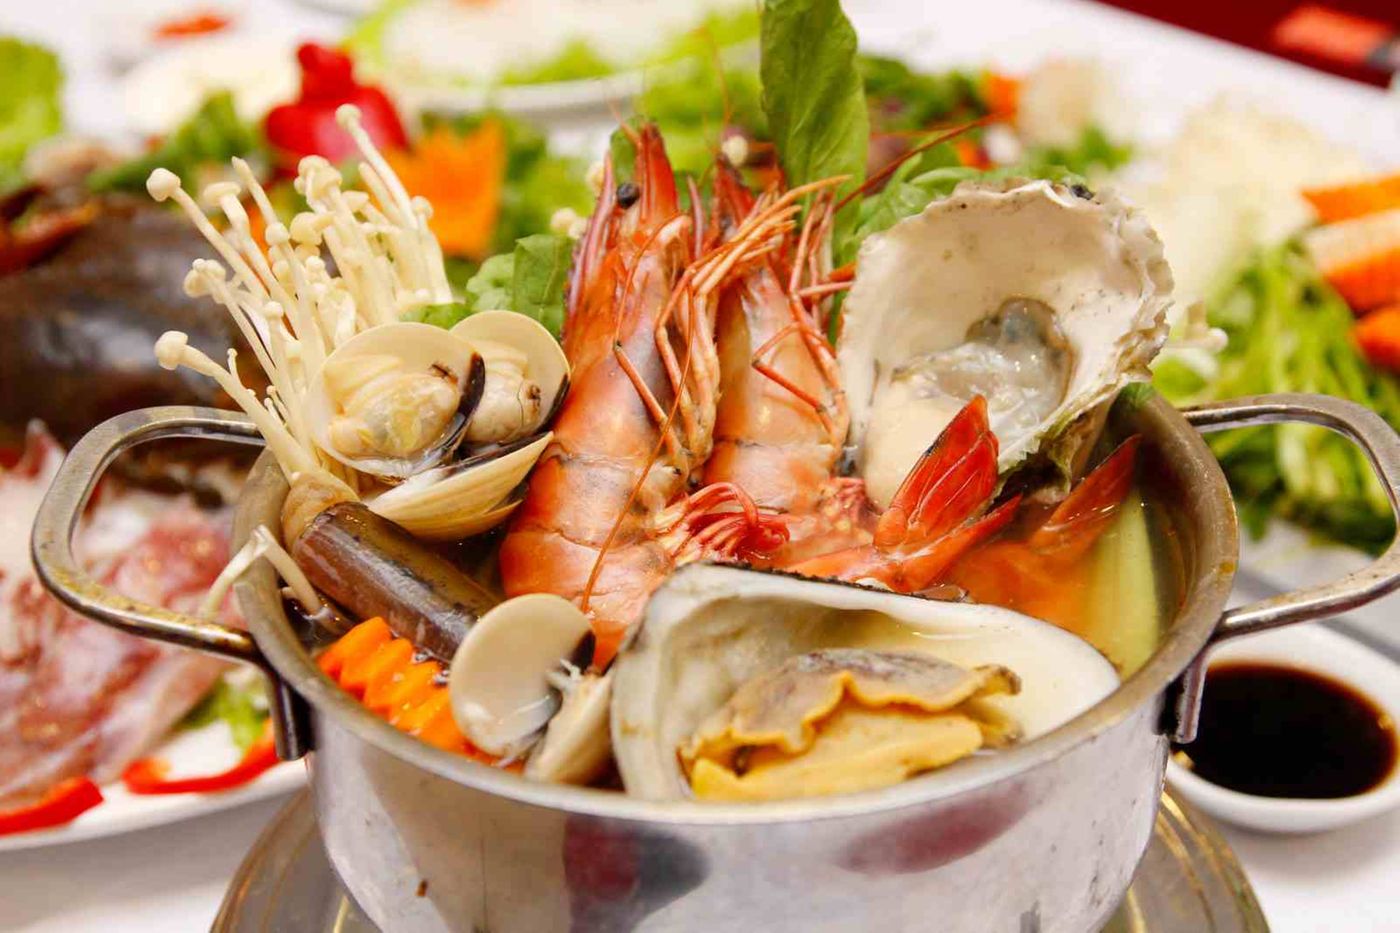 The best places to enjoy seafood in Nha Trang